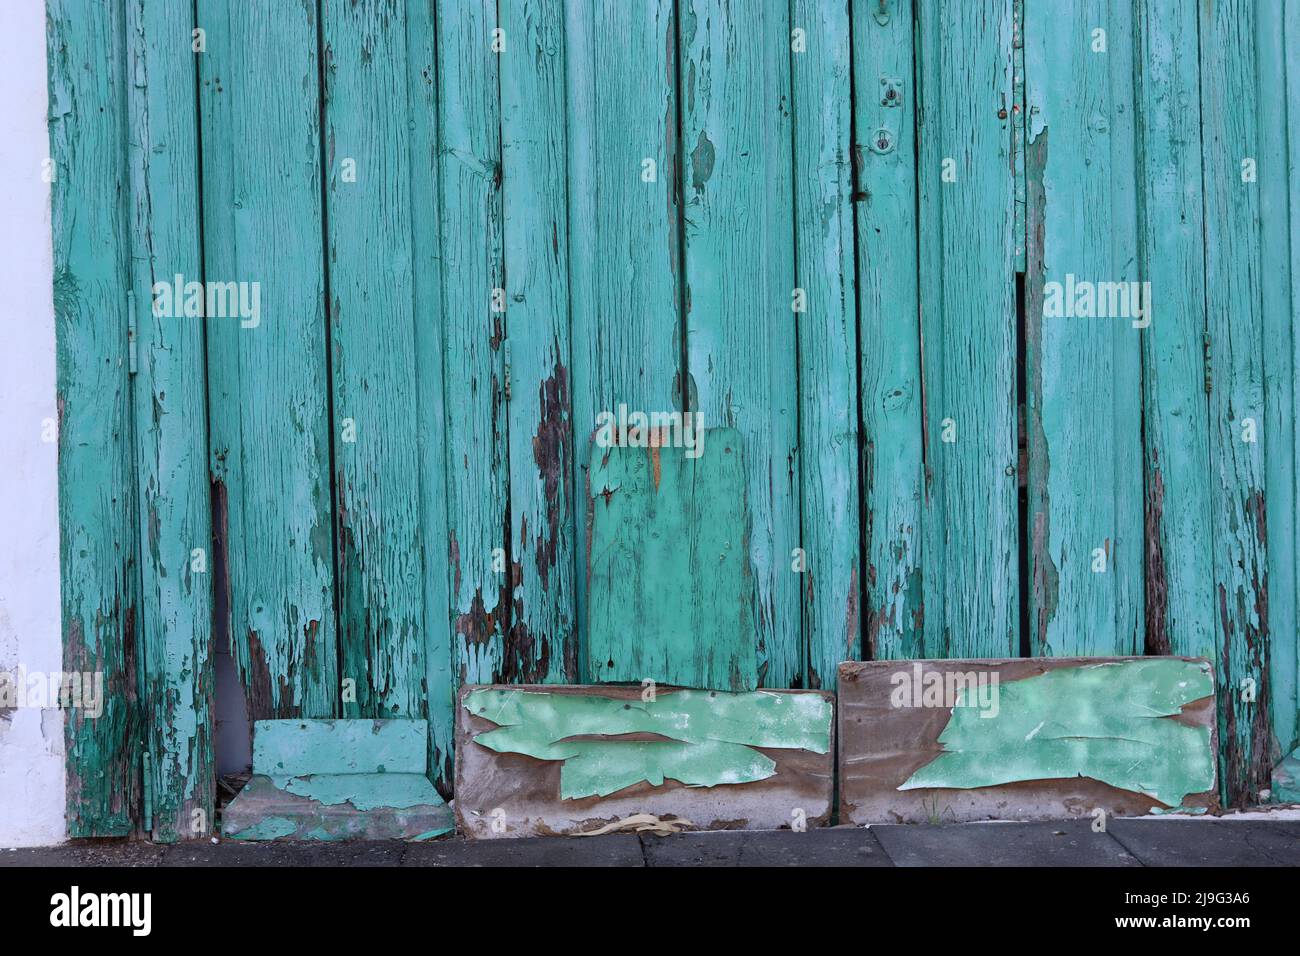 Repeatedly repaired, over painted, preserved wood grain and rustic texture, Lanzarote, Canary Islands Stock Photo